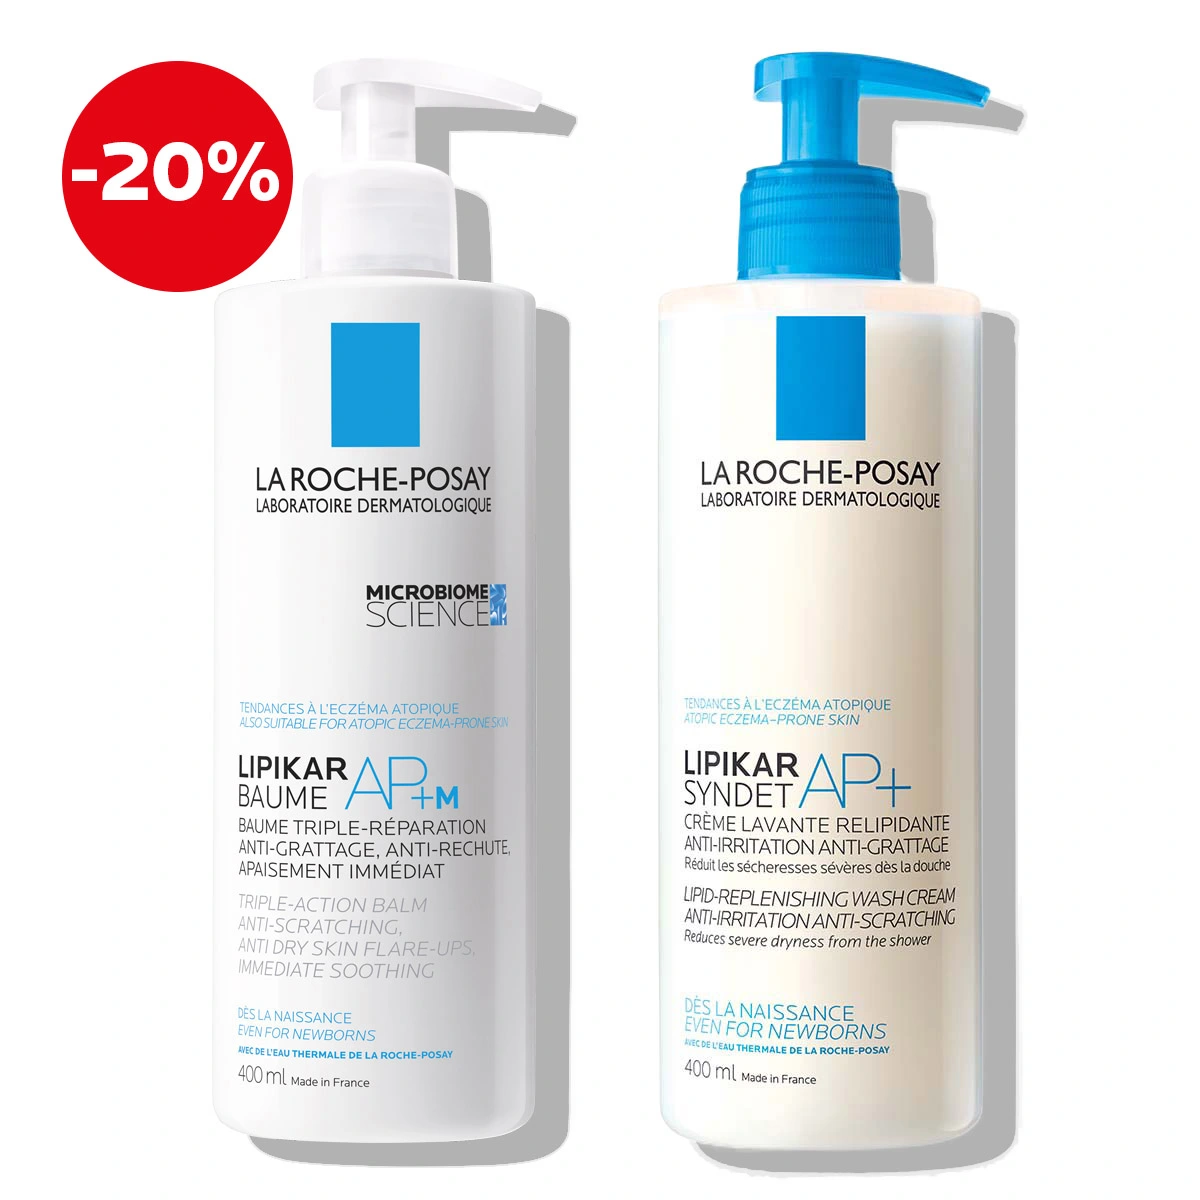 La Roche-Posay LIPIKAR Protocol for dry skin prone to atopy (cleansing and care)